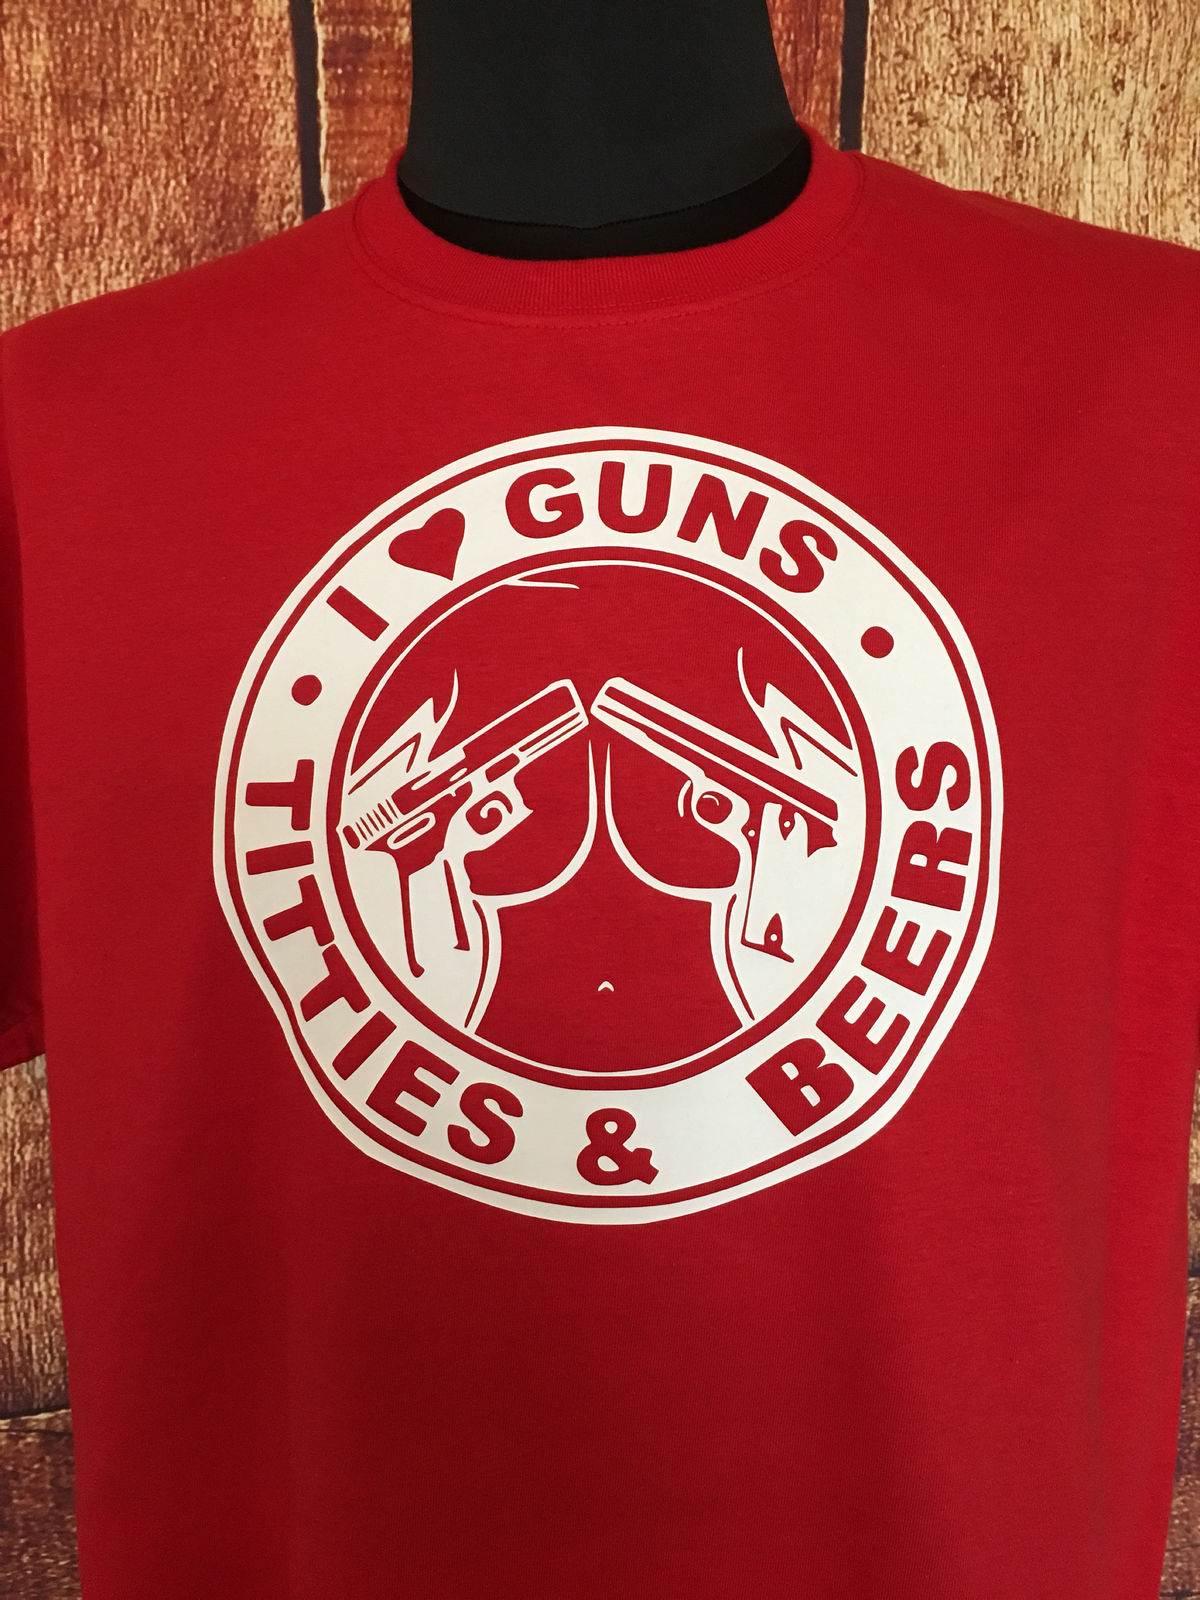 I love guns titties and beer t shirt, great gift for dad or brother/son